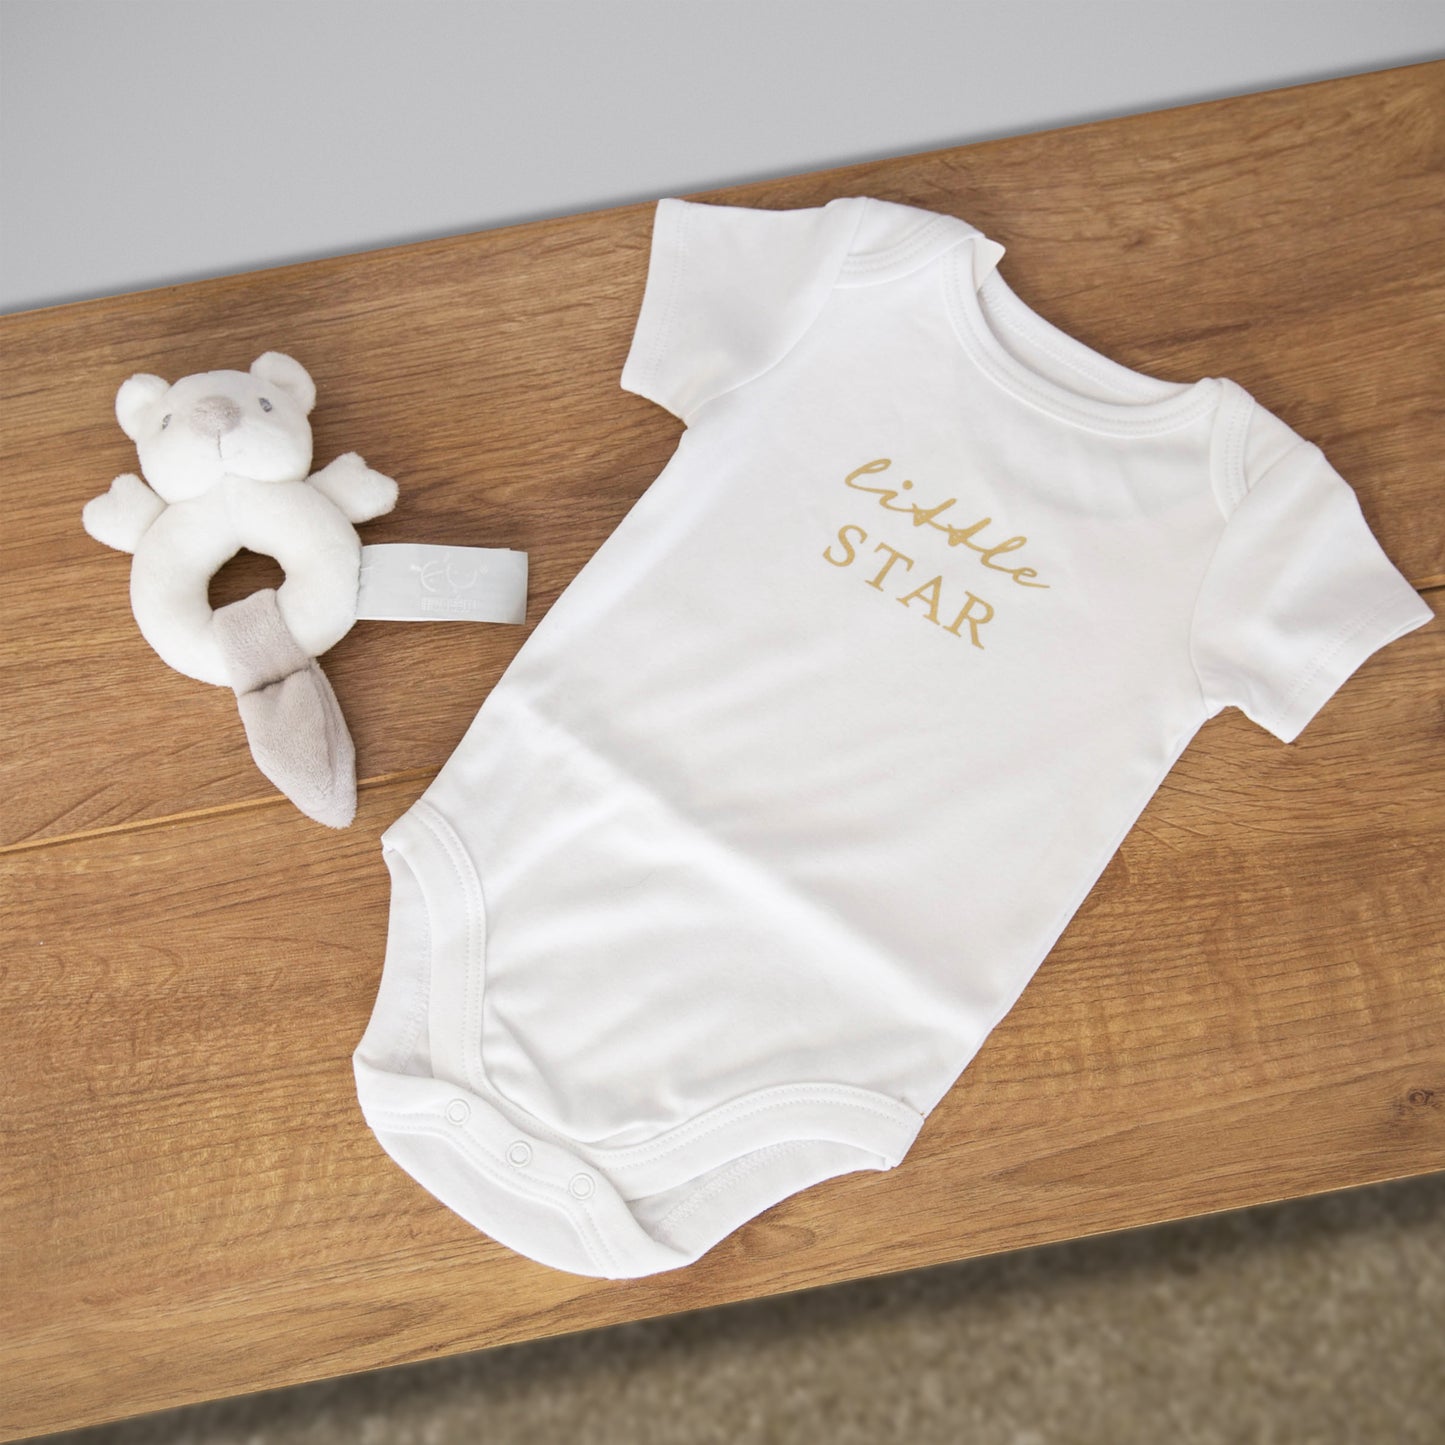 Bambino Baby Suit and Rattle Set